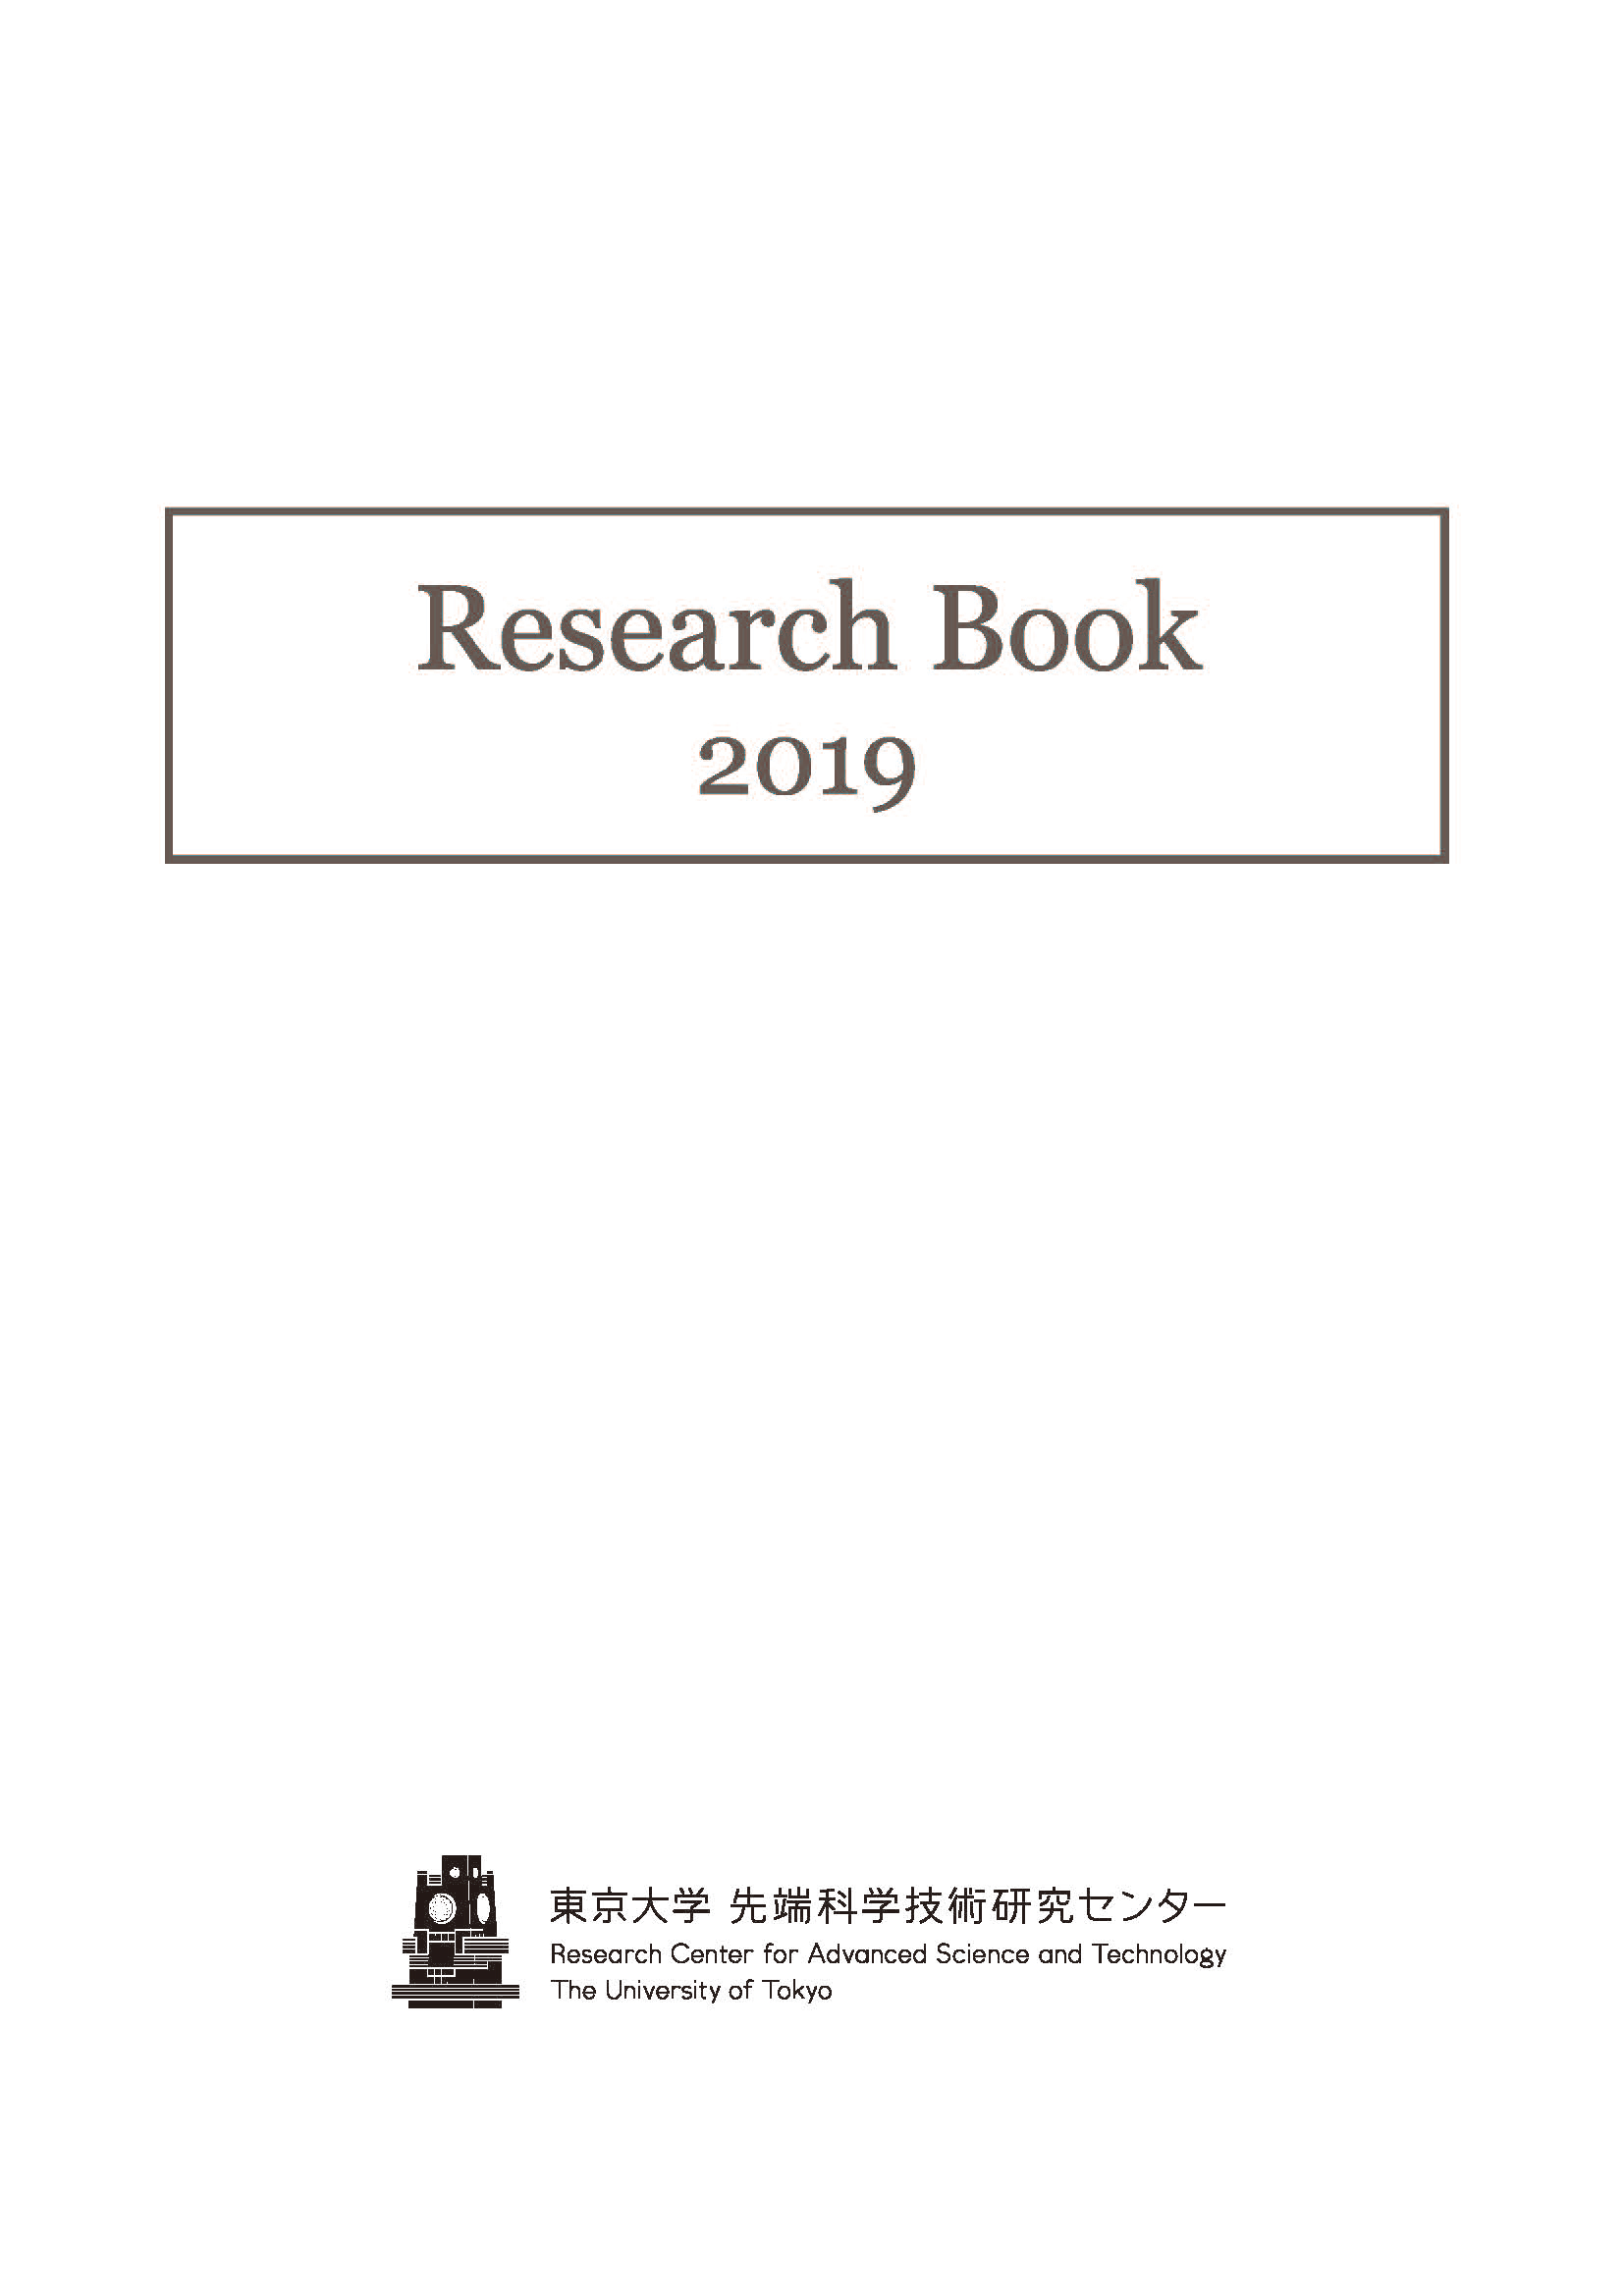 2019 Research BOOK cover